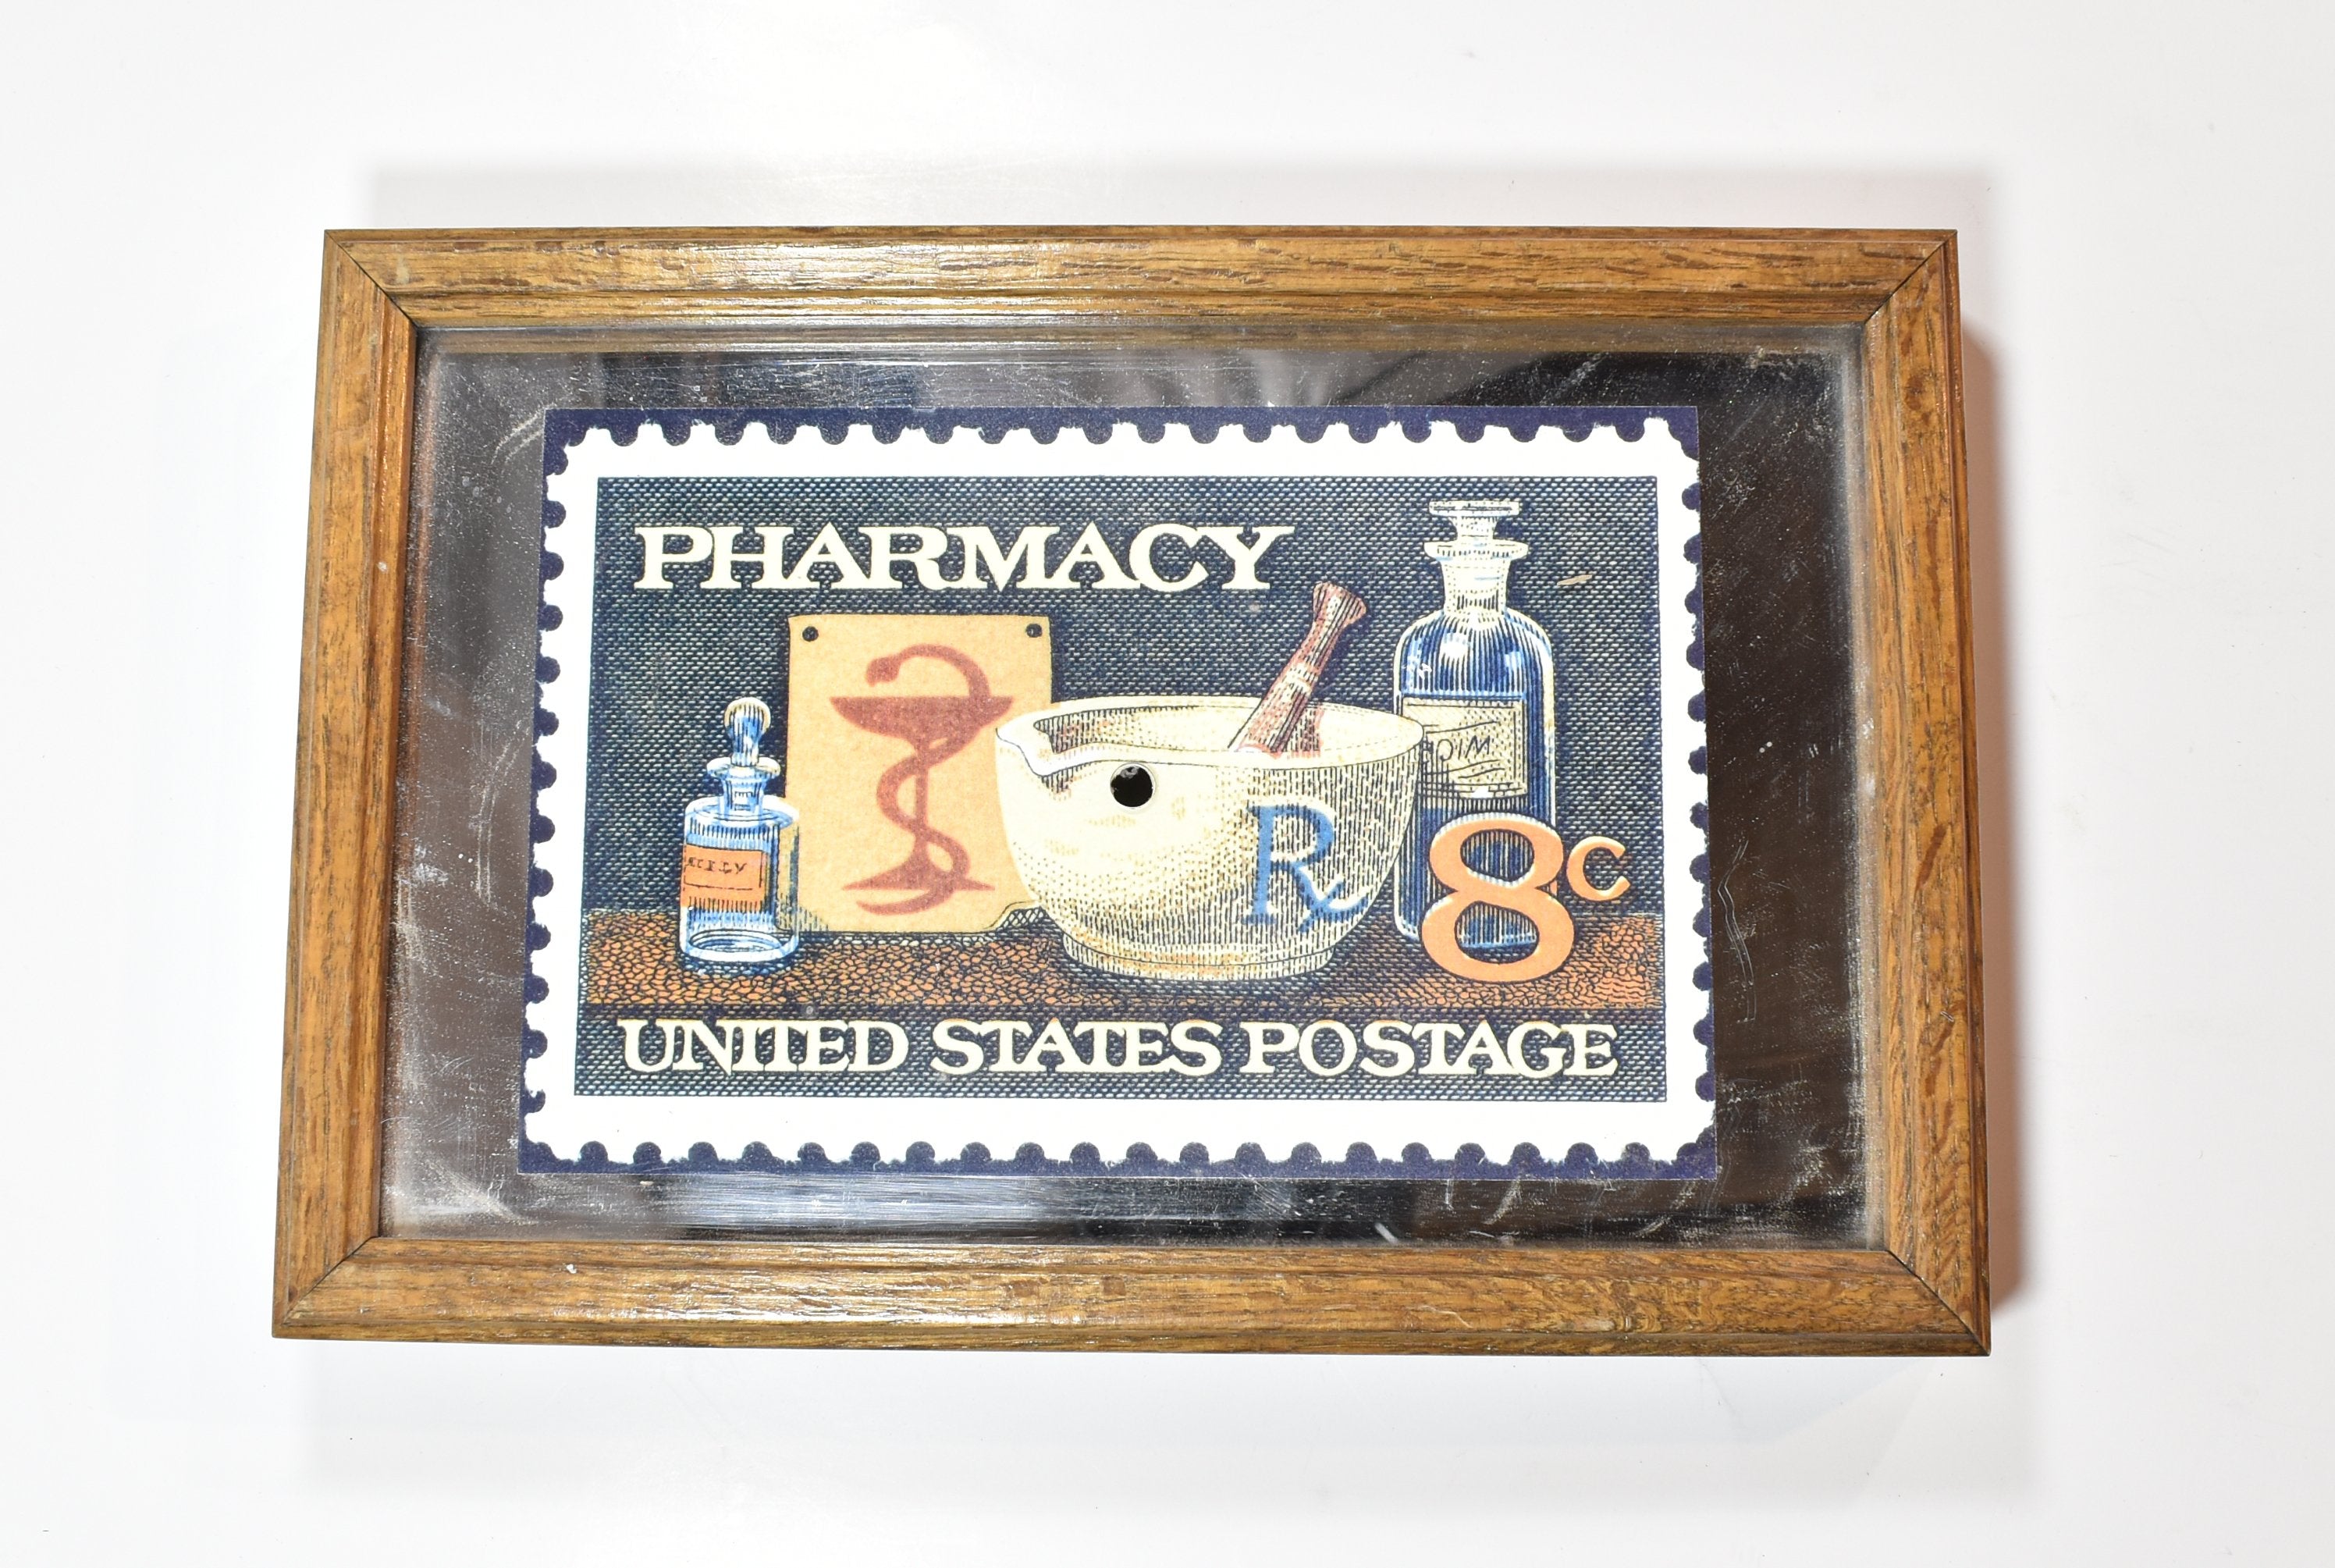 Vintage Pharmacy United States Postage Framed Mirror Collectible Stamp 8 x 12 Us